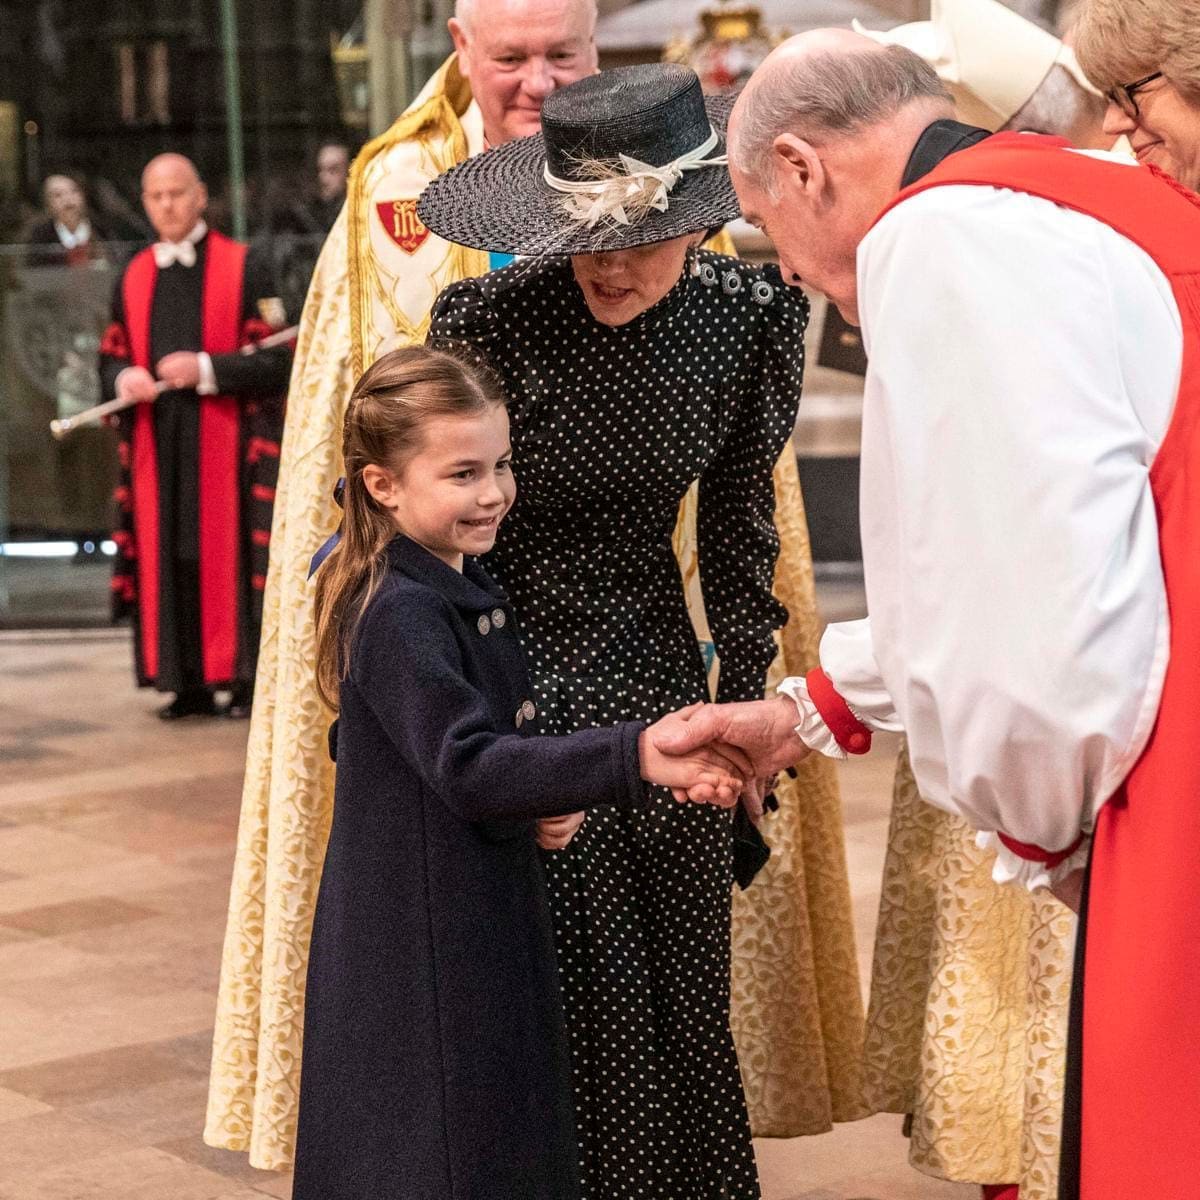 The polite little Princess shook hands with clergymen at the service.